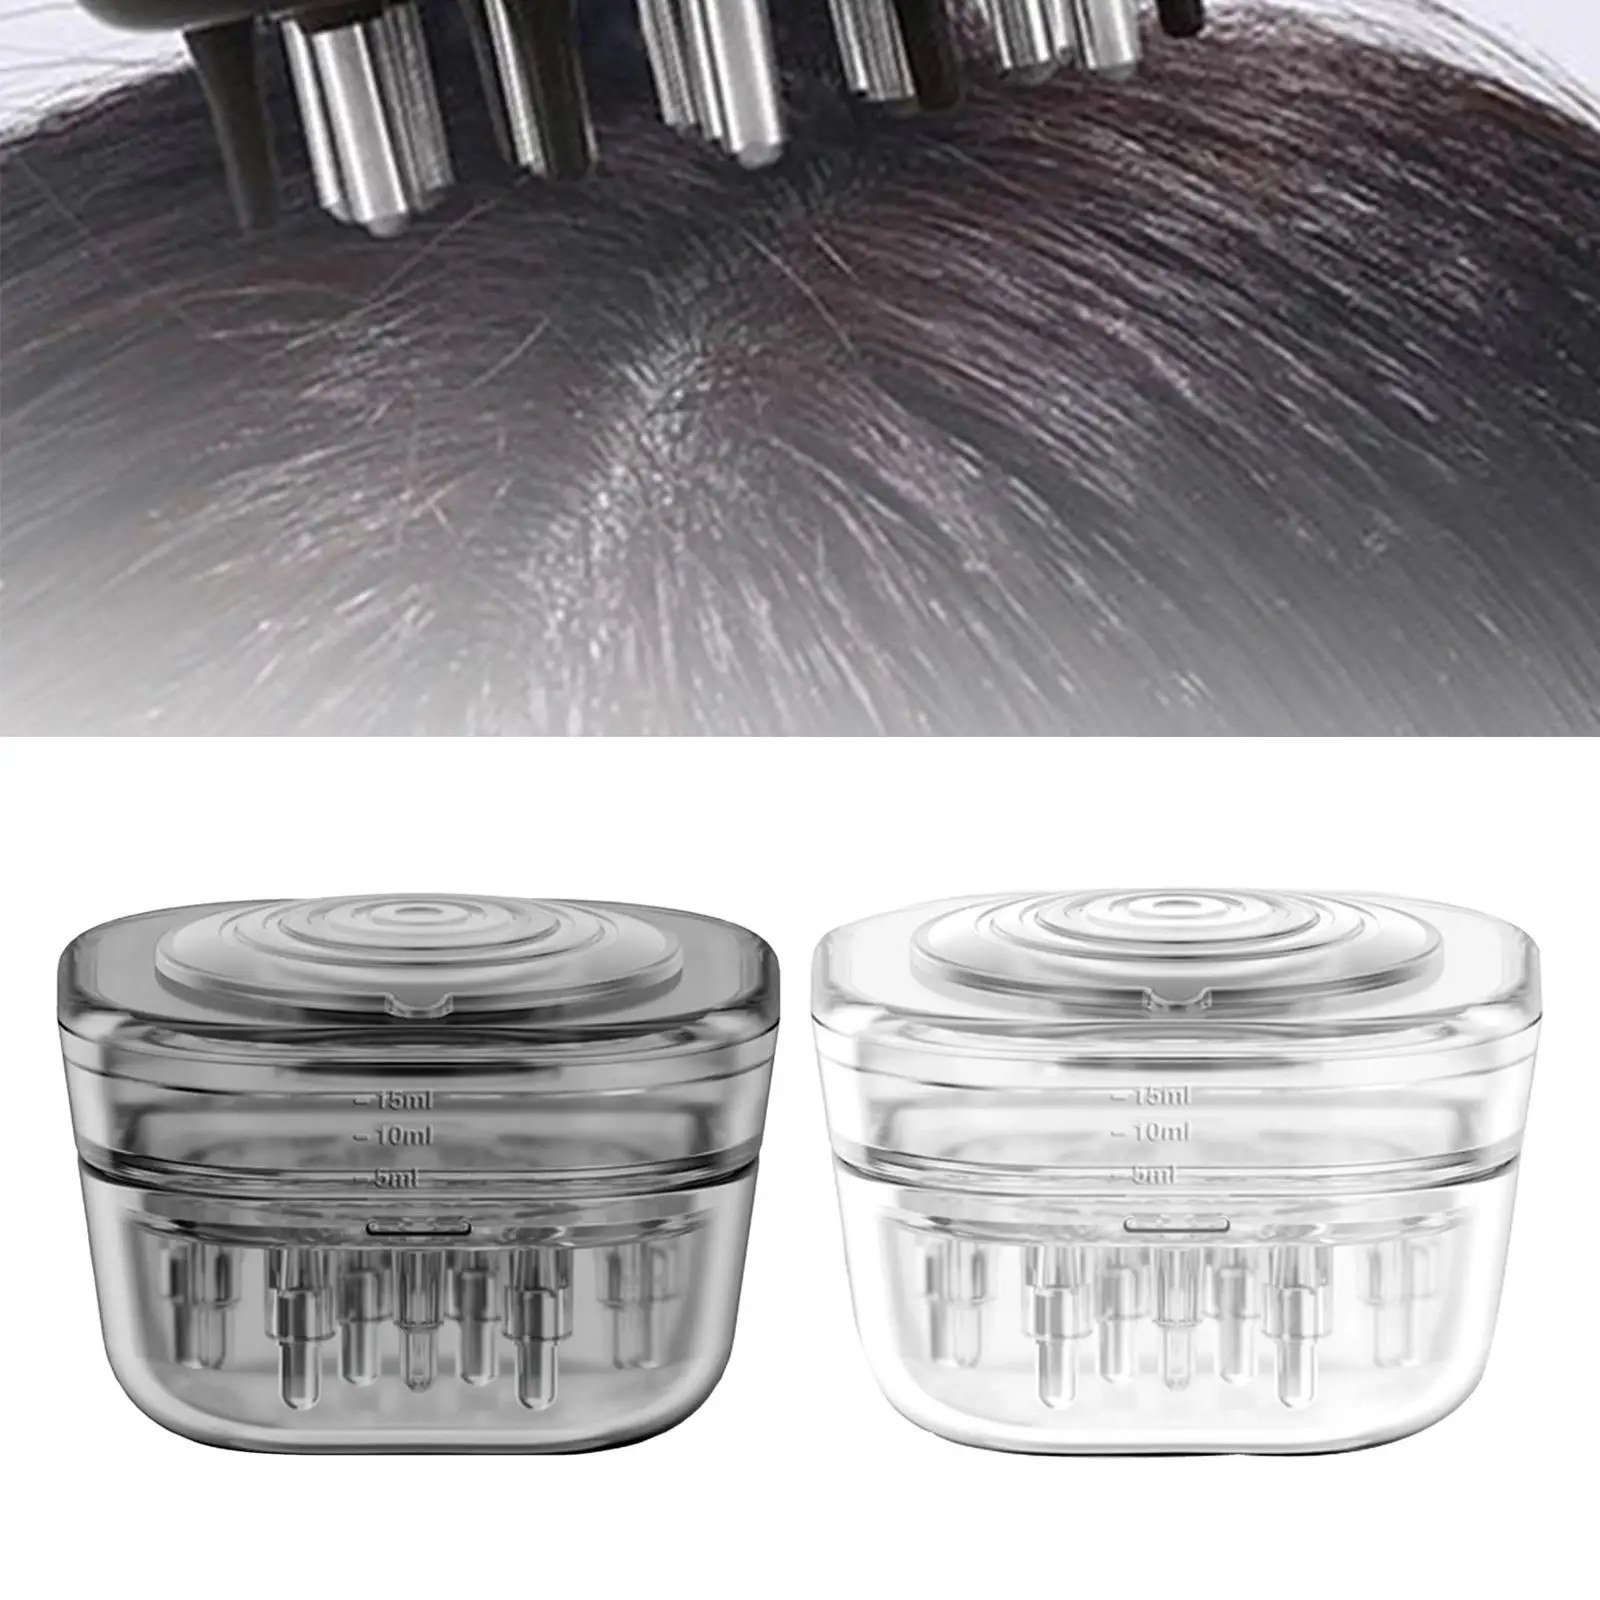 Scalp Applicator Comb Rolling Ball Hair Massage Brush for essential Oil